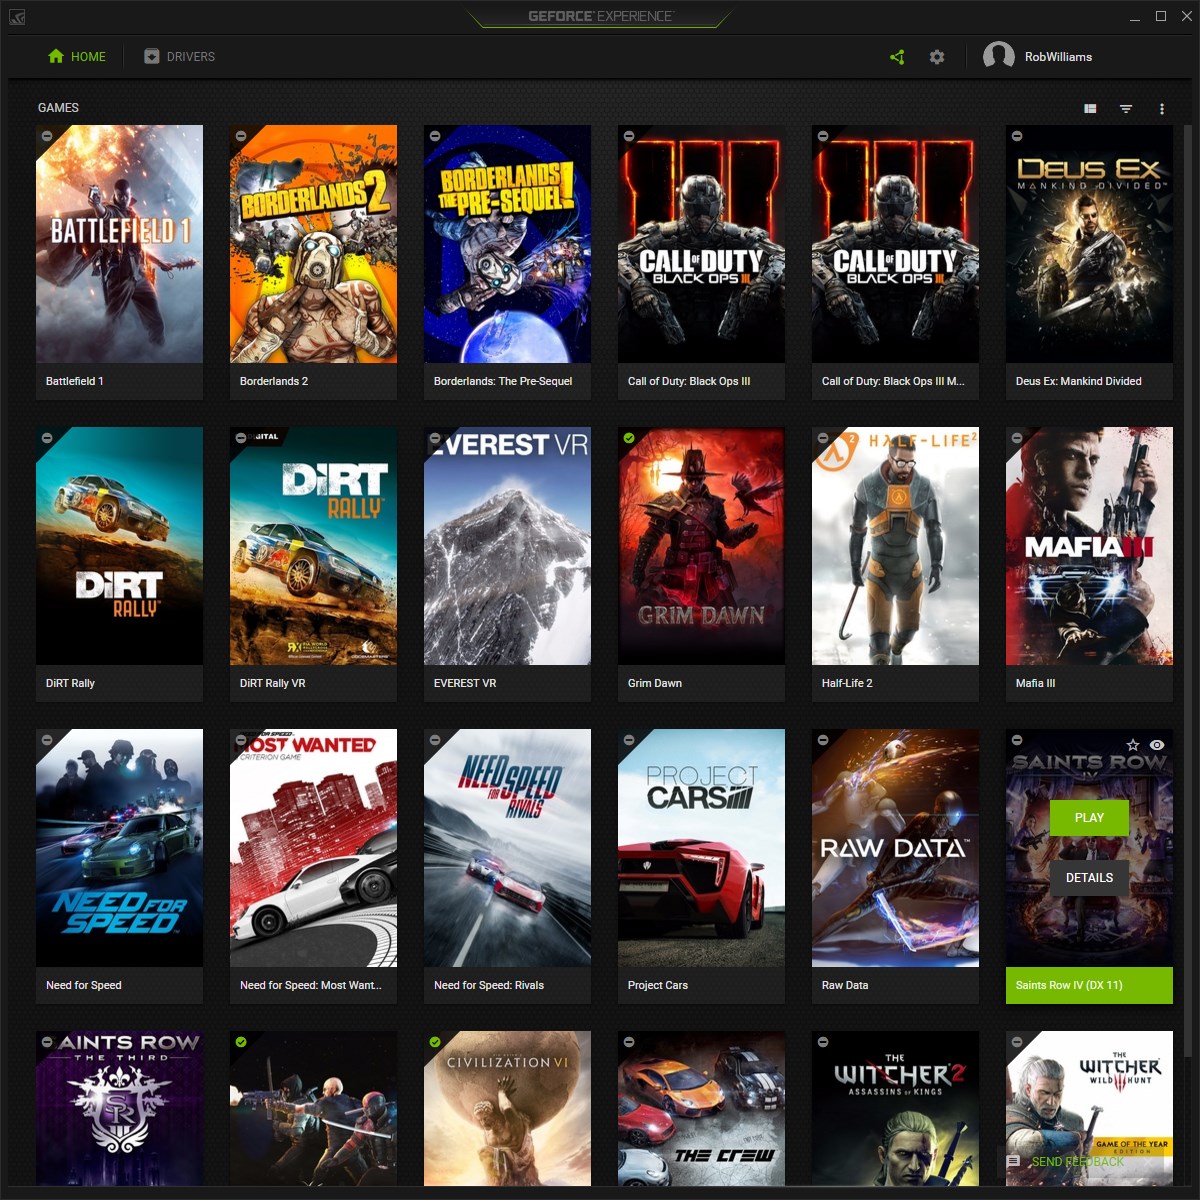 NVIDIA GeForce Experience Showcase – Going Beyond Graphics – Techgage